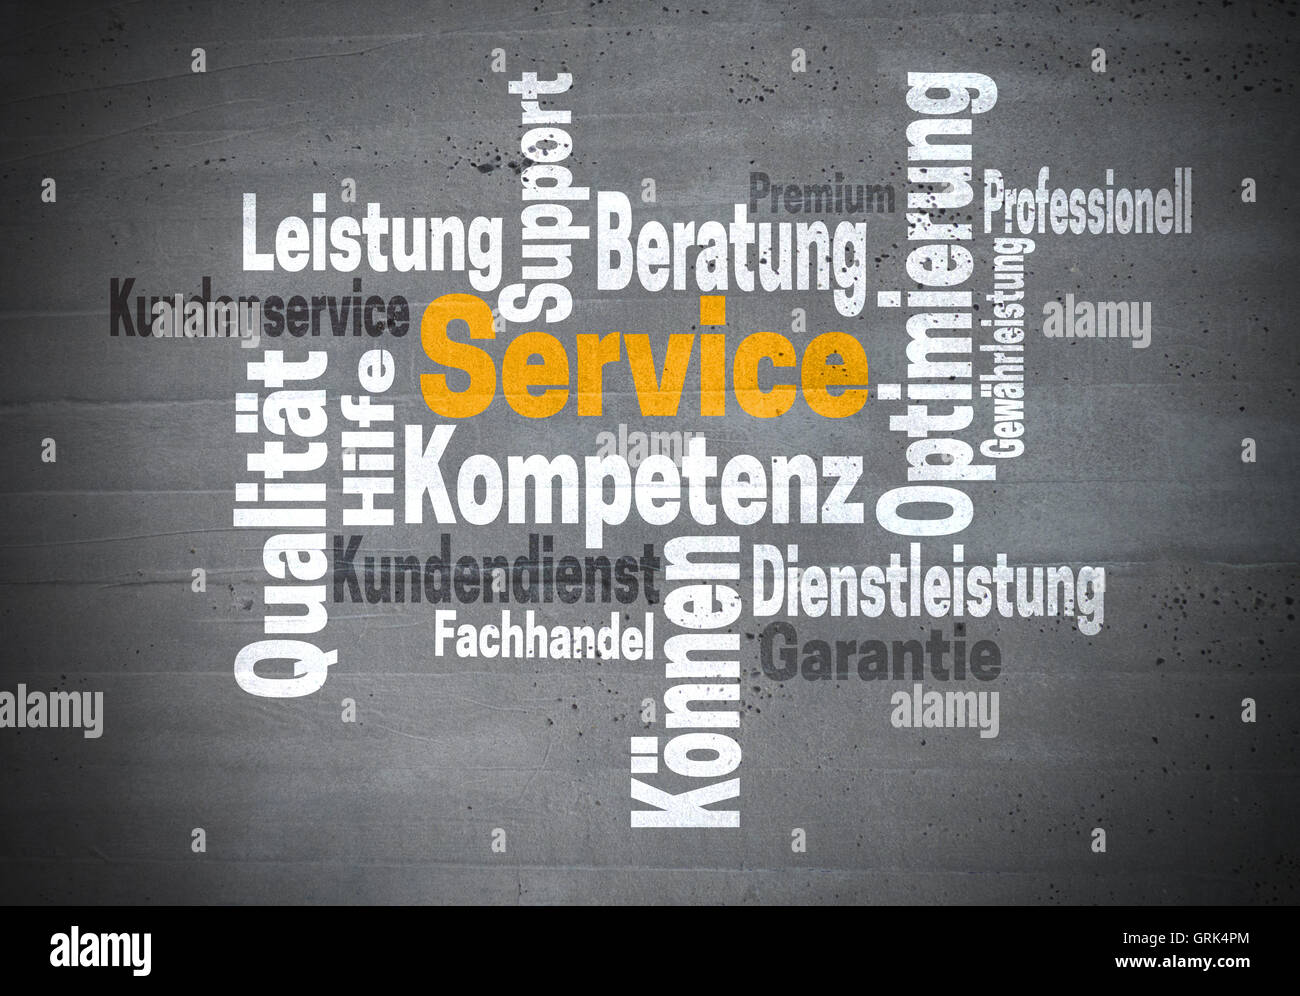 service support kompetenz (in german support competency) word cloud concept. Stock Photo